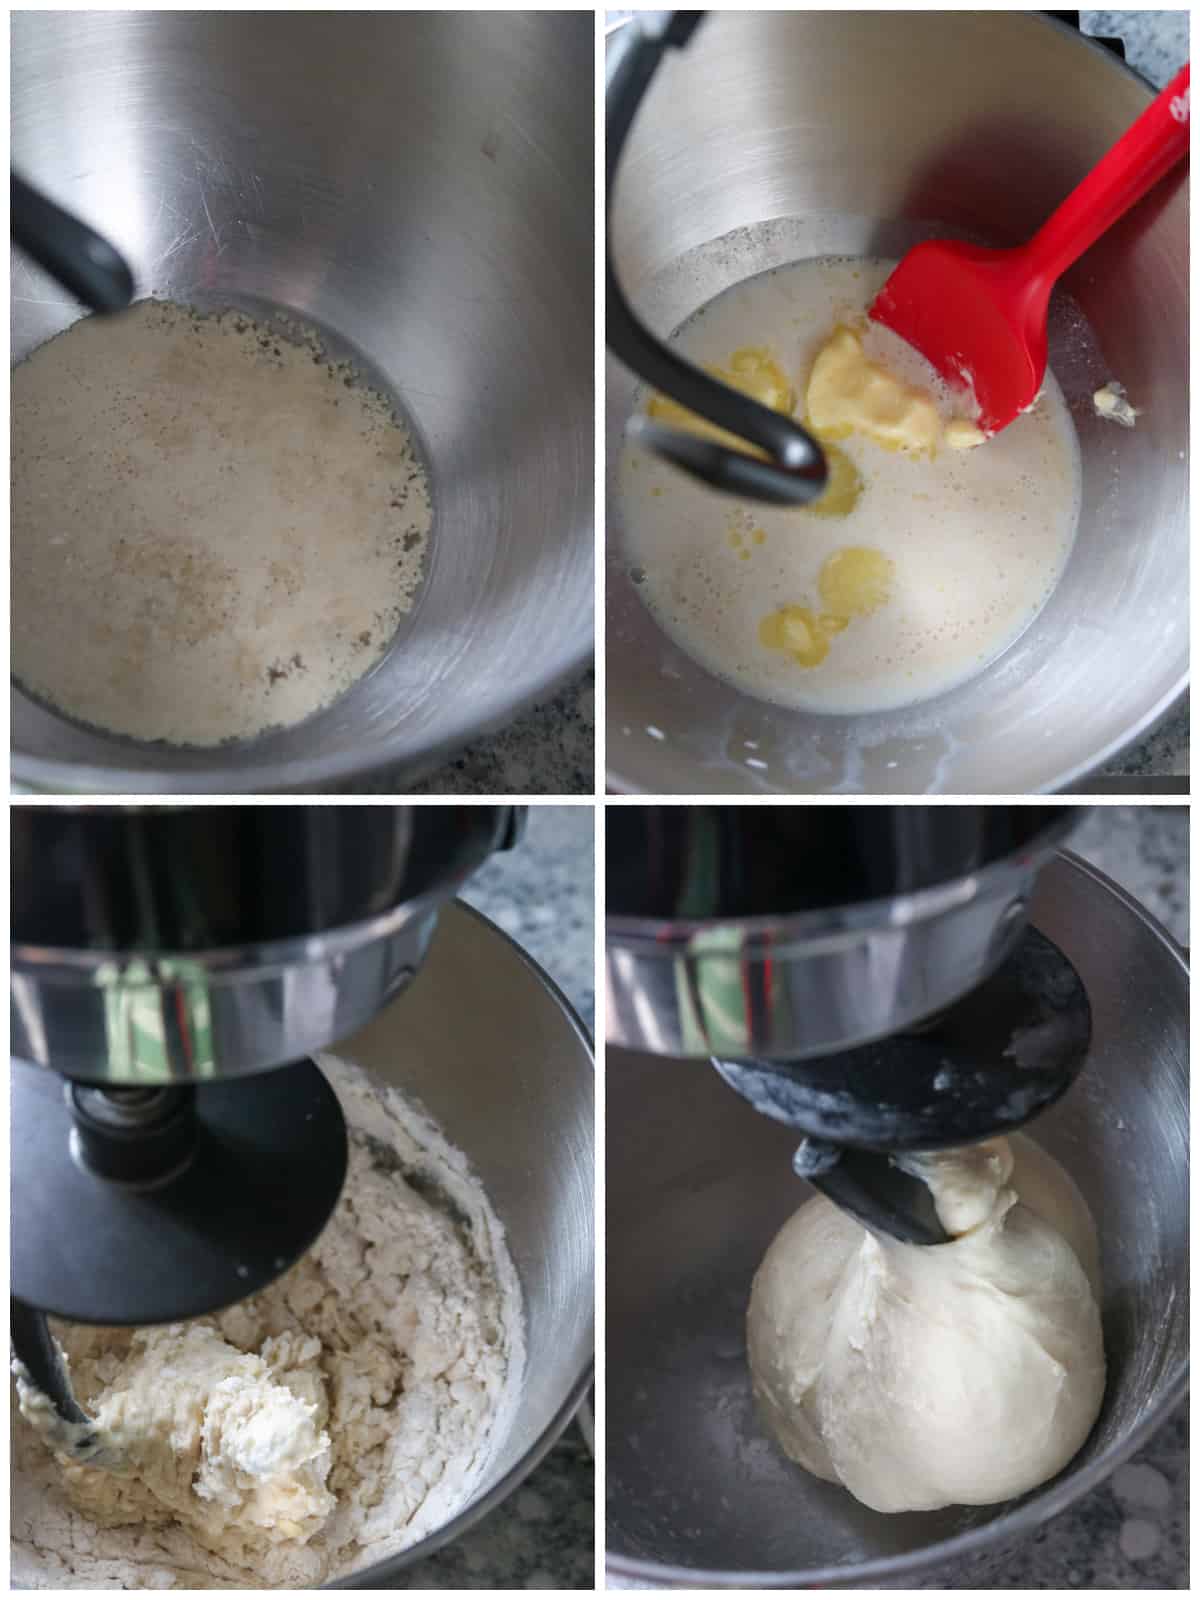 A collage showing the process of mixing the bread dough for cream cheese bread rolls.